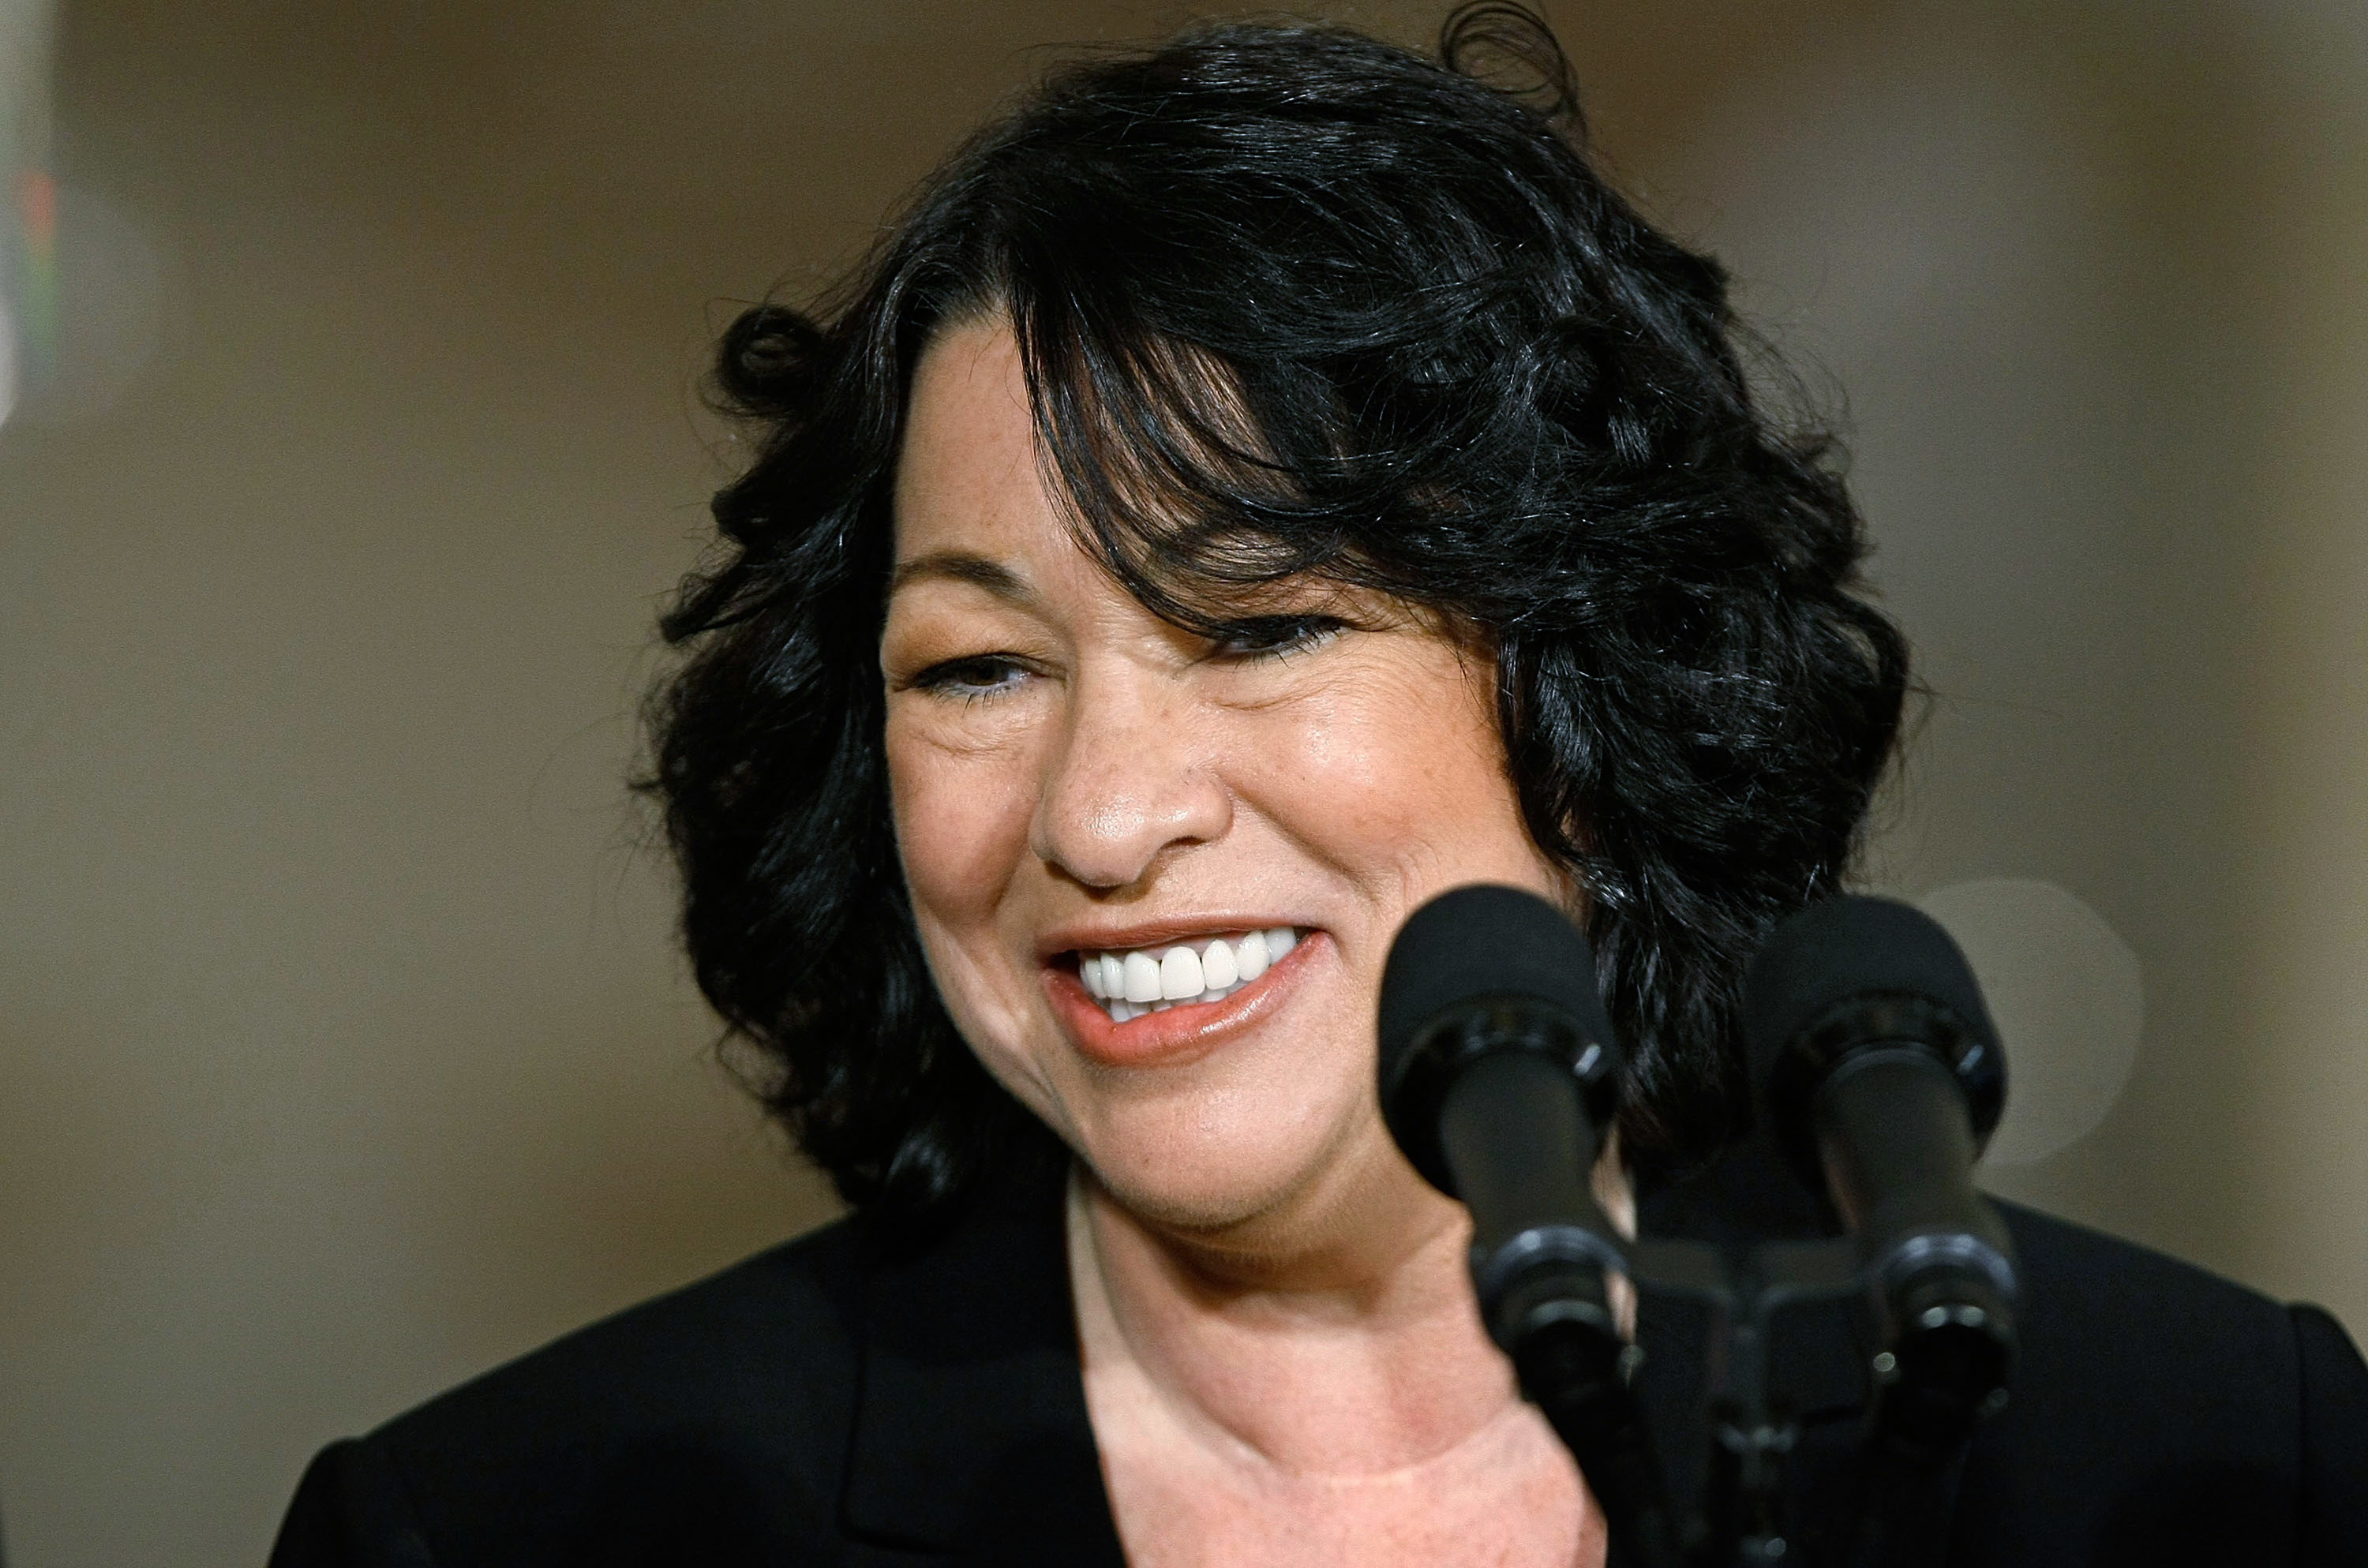 Sonia Sotomayor smiling, with a microphone in front of her